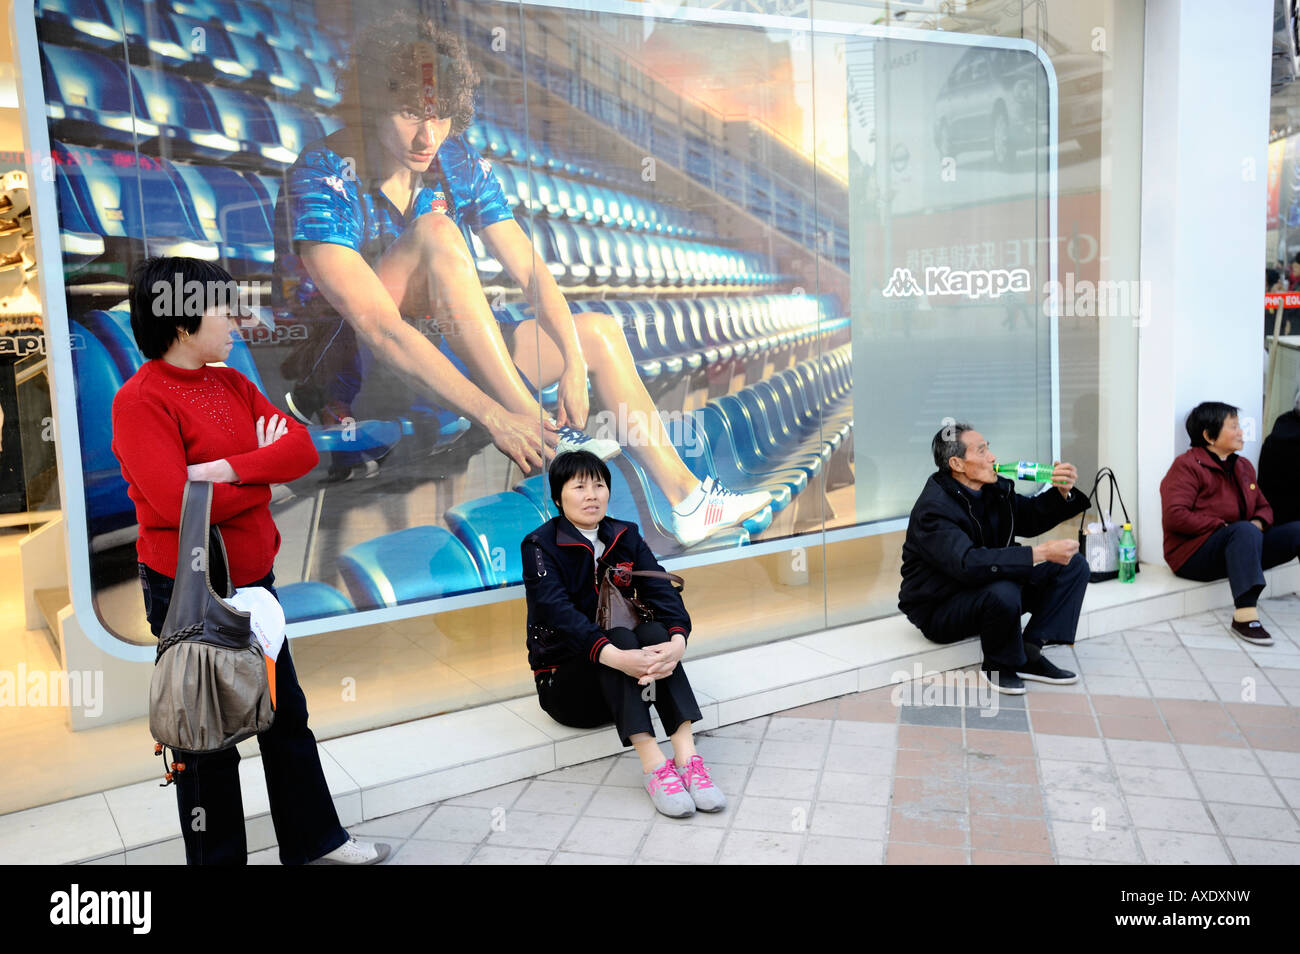 People rest themselves in front of a Kappa billboard in Wangfujing street  in Beijing, China. 23-Mar-2008 Stock Photo - Alamy